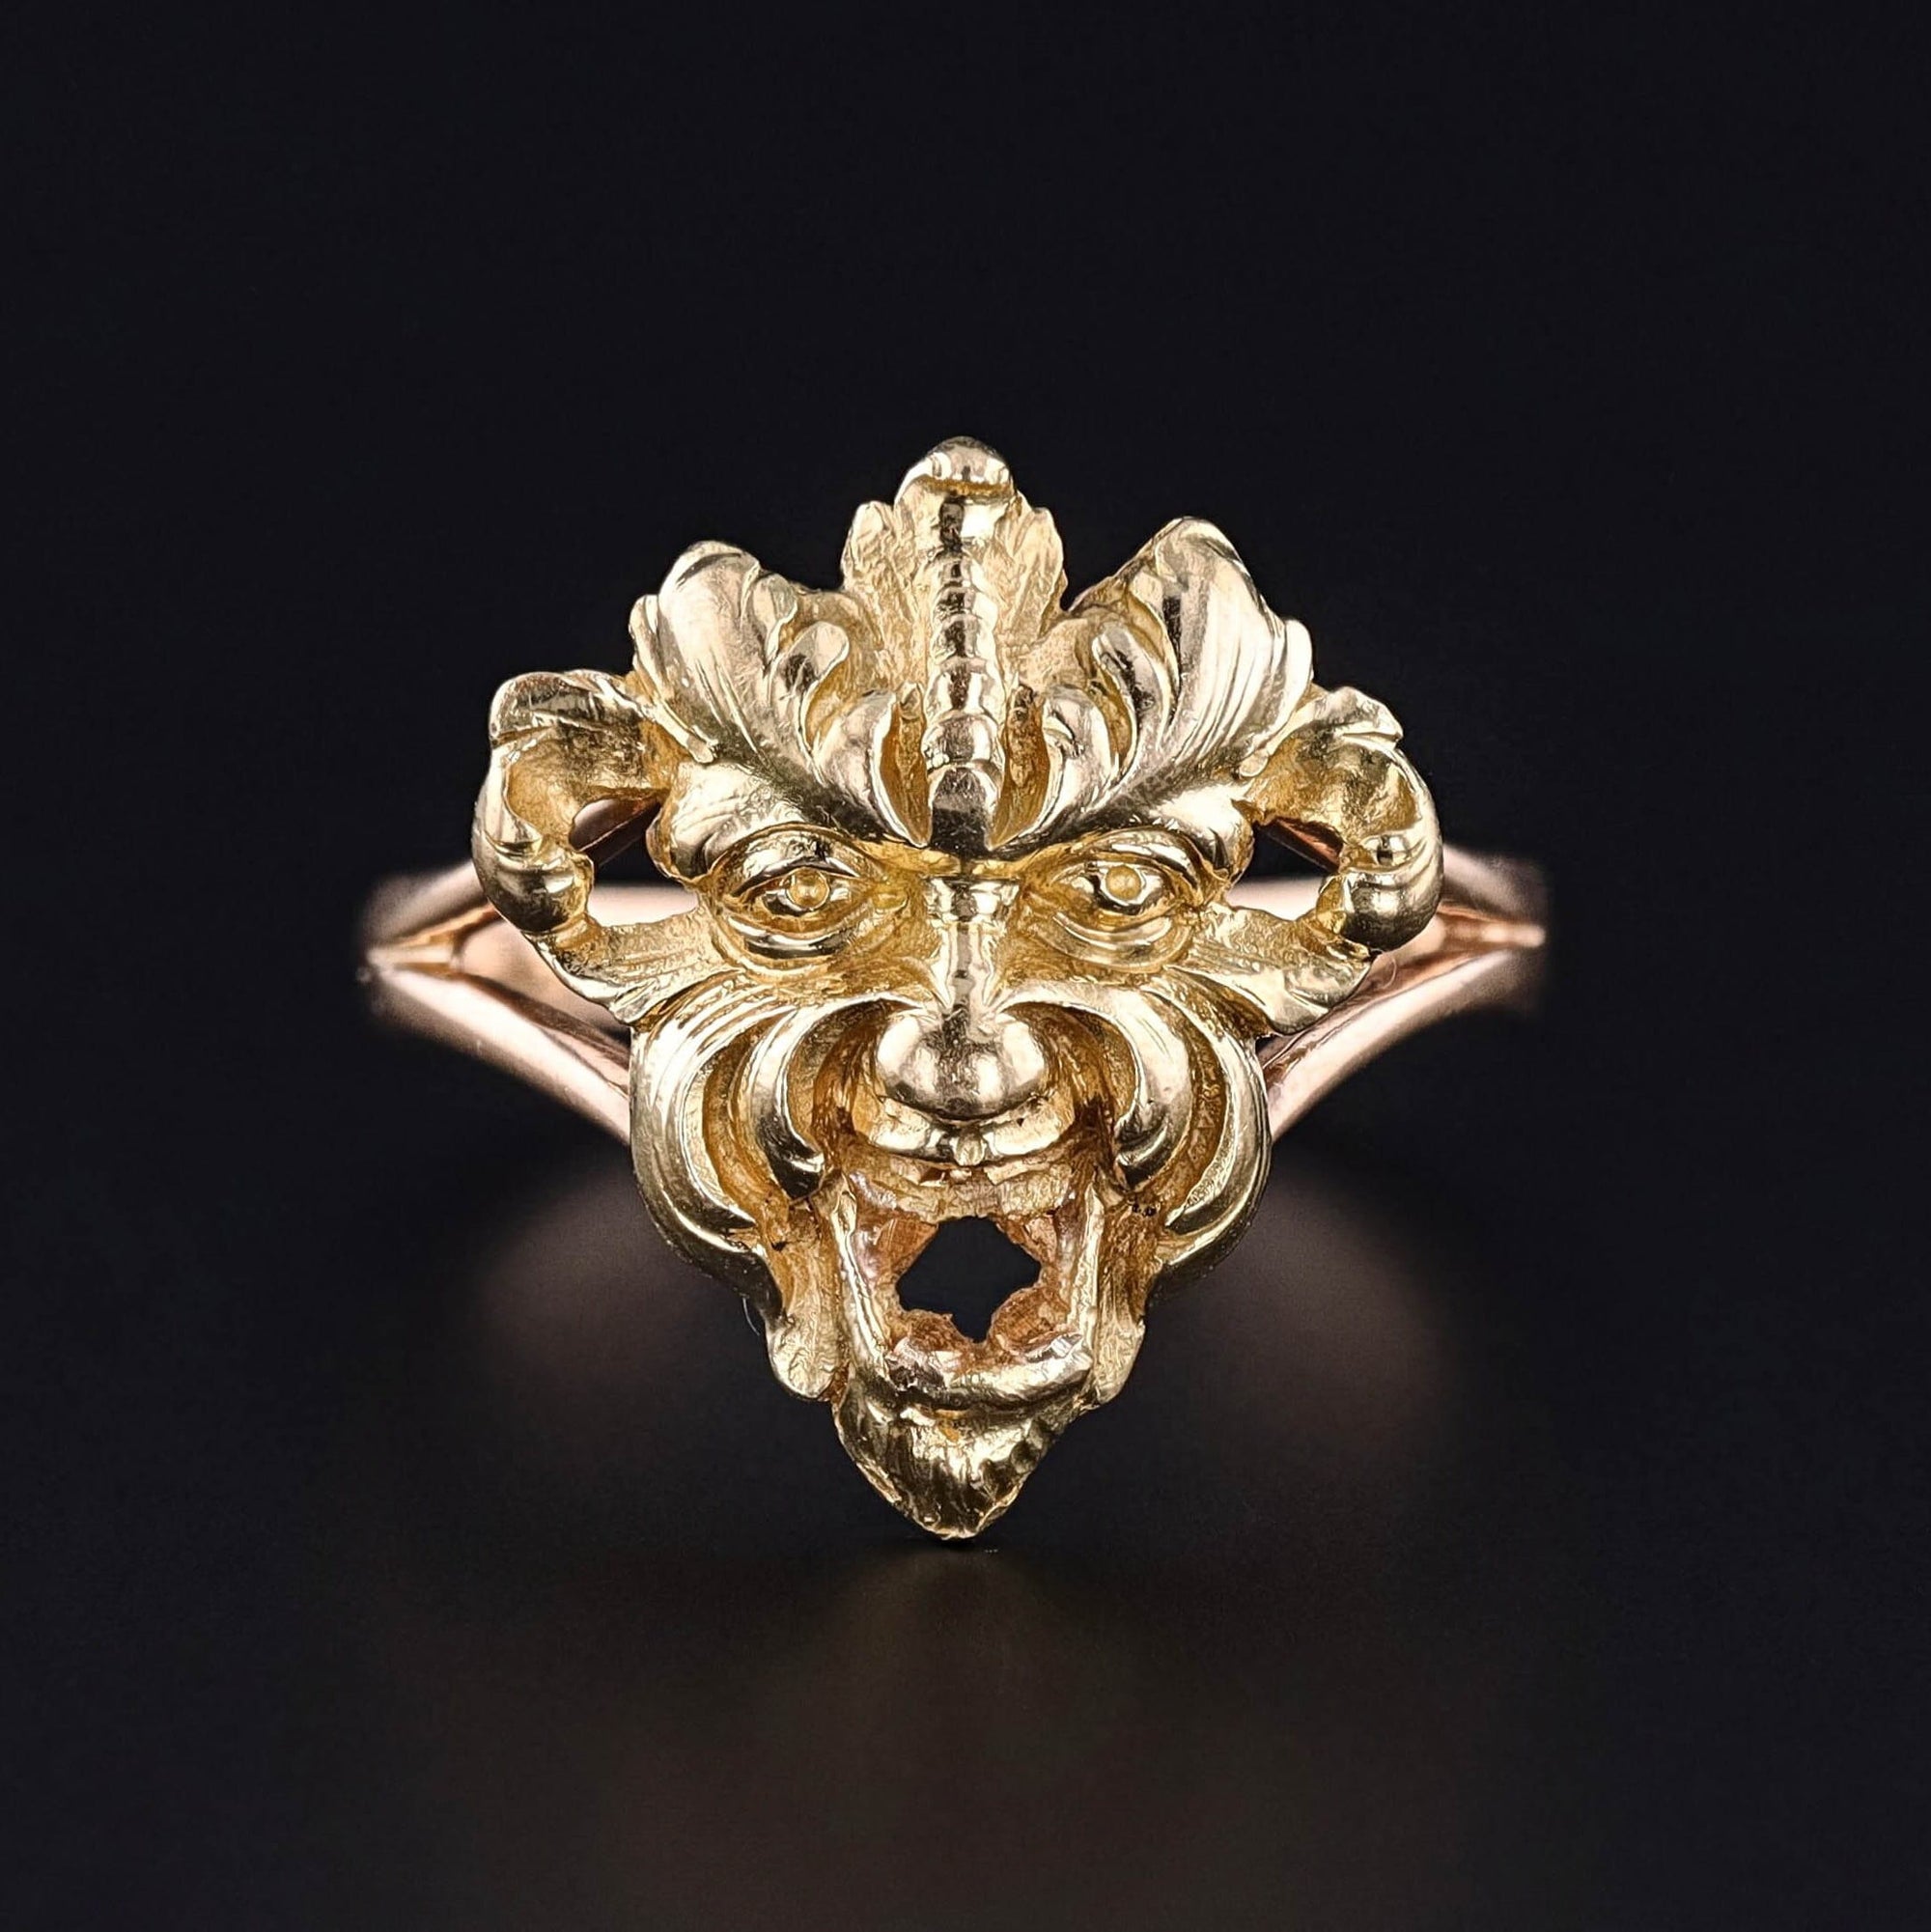 An antique figural ring depicting a greenman or a gargoyle of 14k gold.